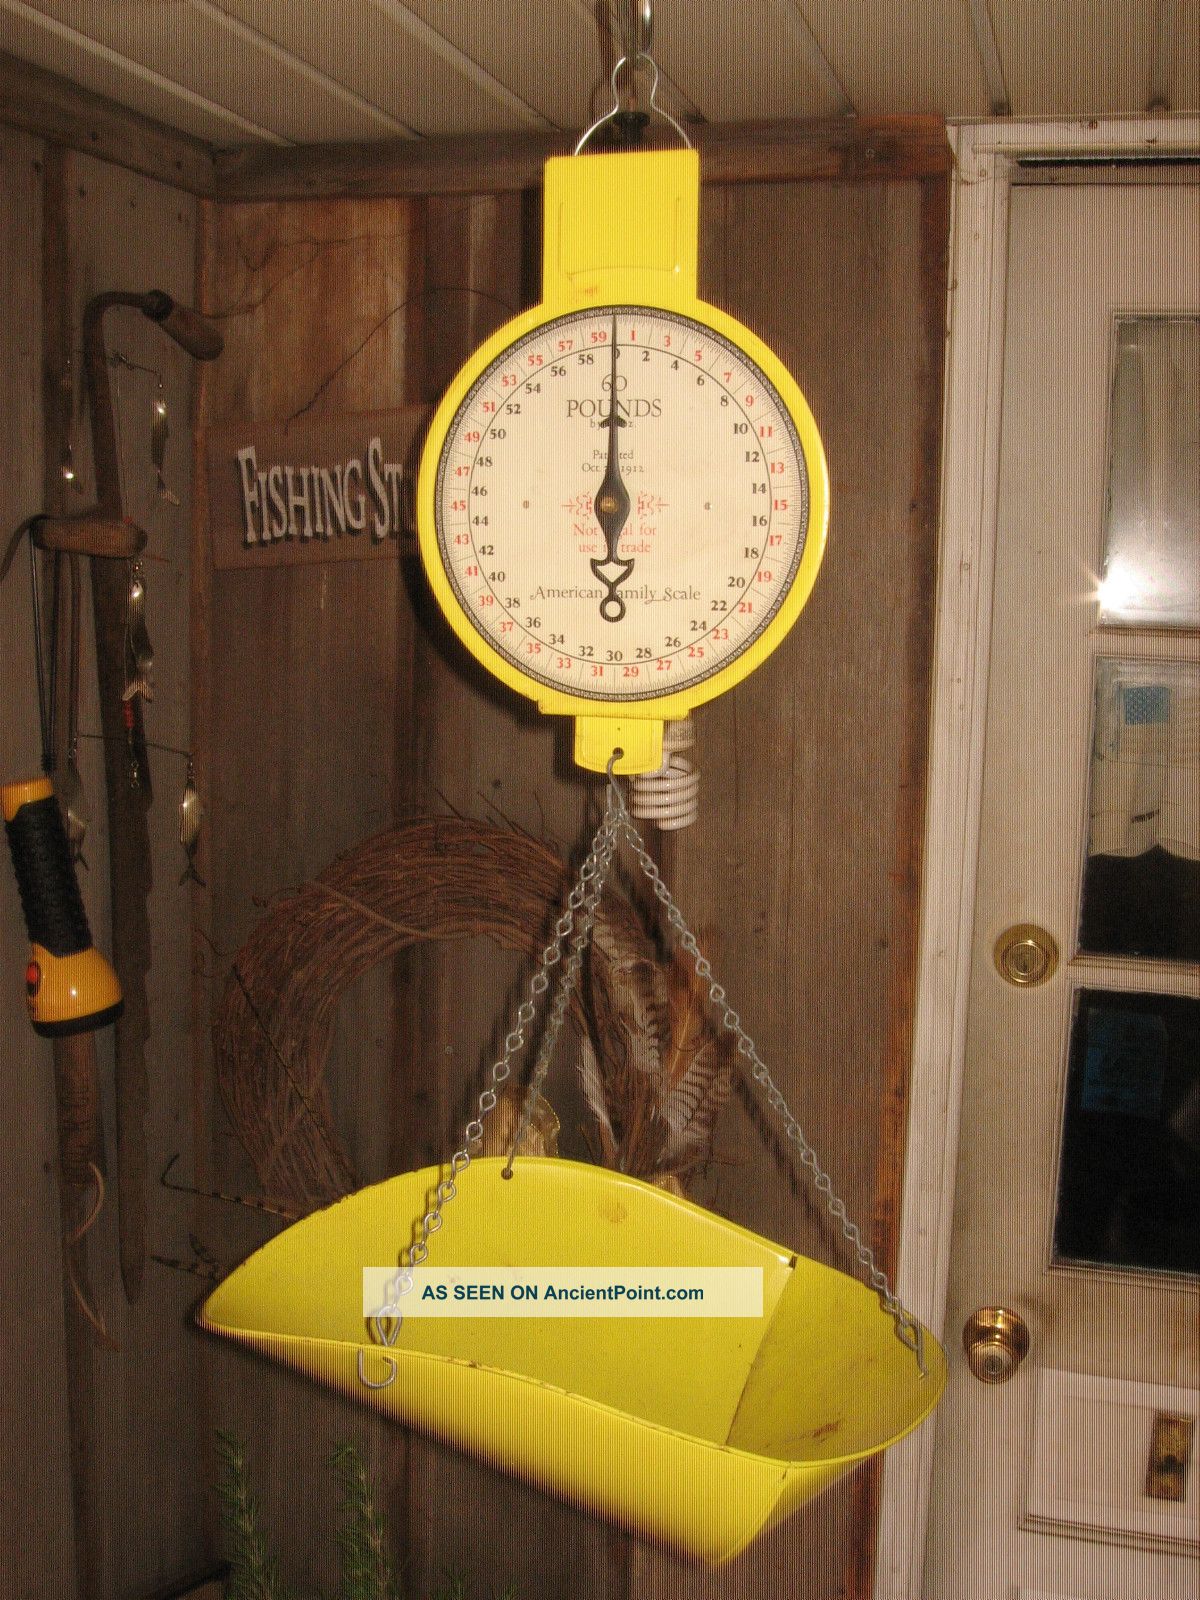 http://ancientpoint.com/imgs/a/a/g/i/e/vintage_1912_country_store_hanging_scale__60lb____american_family_scale__all_orig__1_lgw.jpg